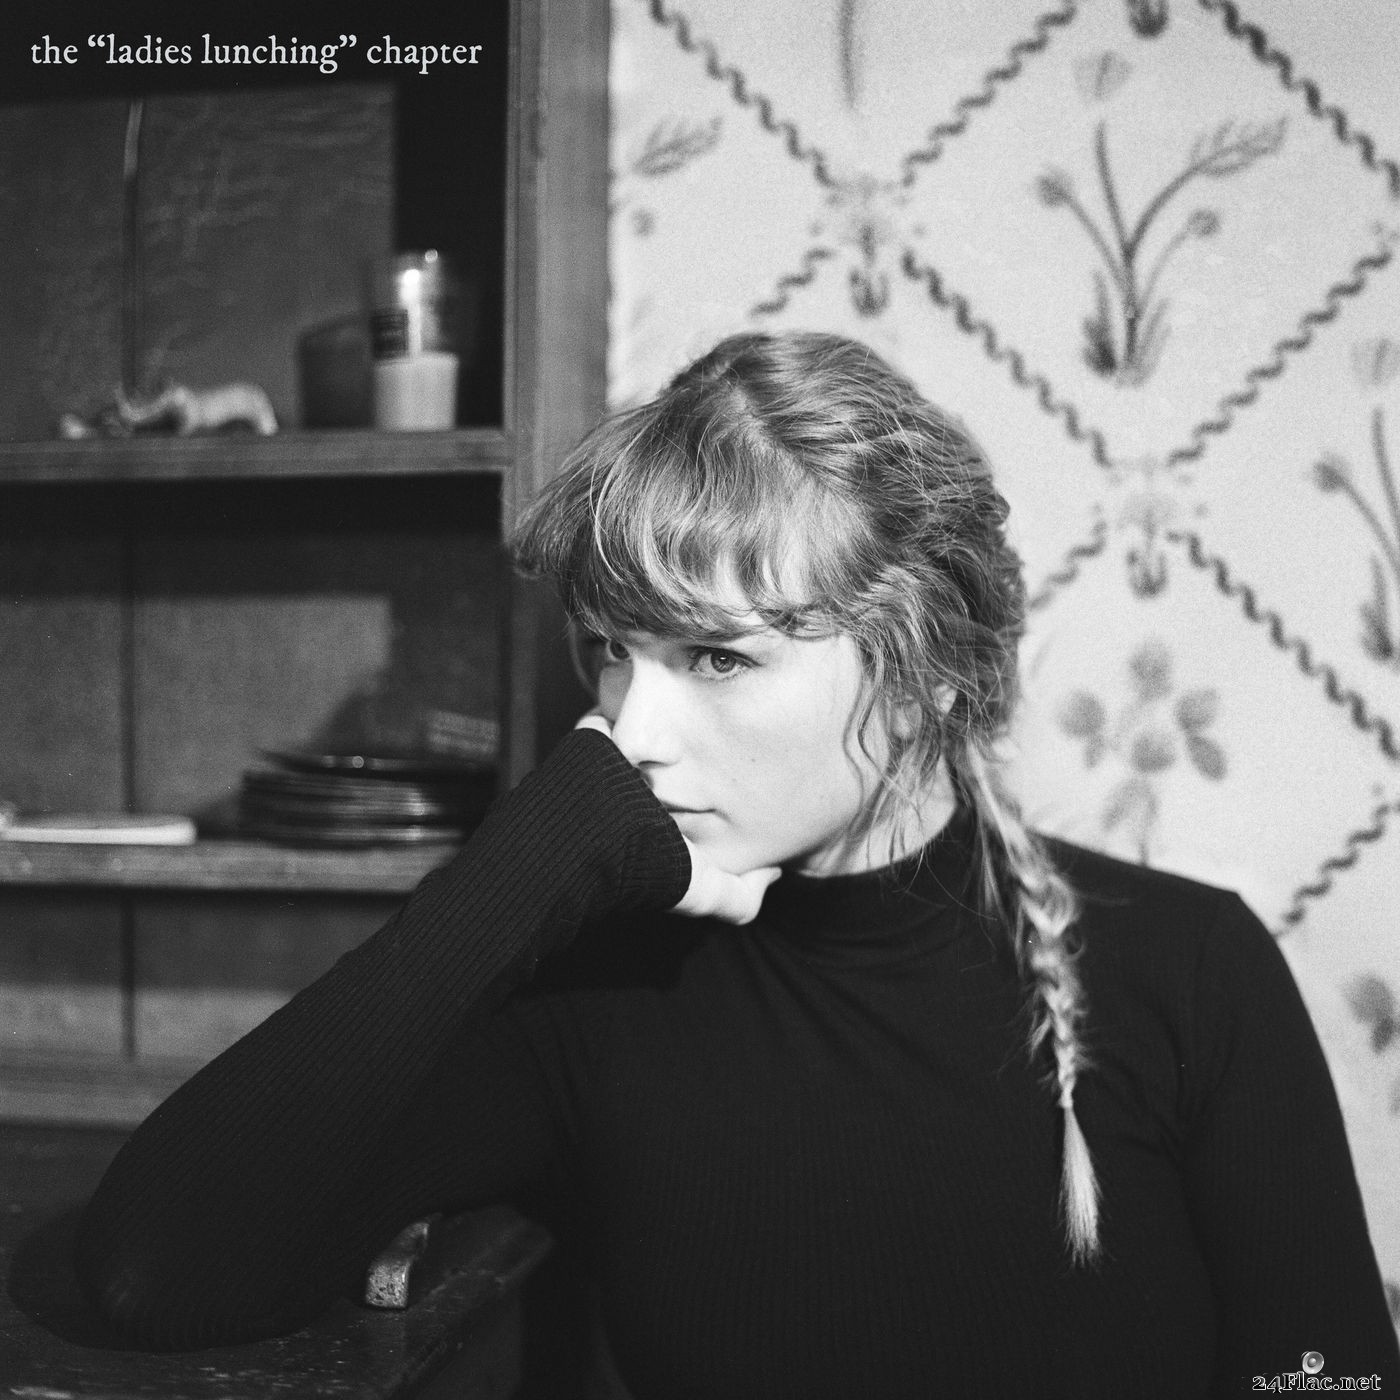 Taylor Swift - the "ladies lunching" chapter (2021) FLAC + Hi-Res